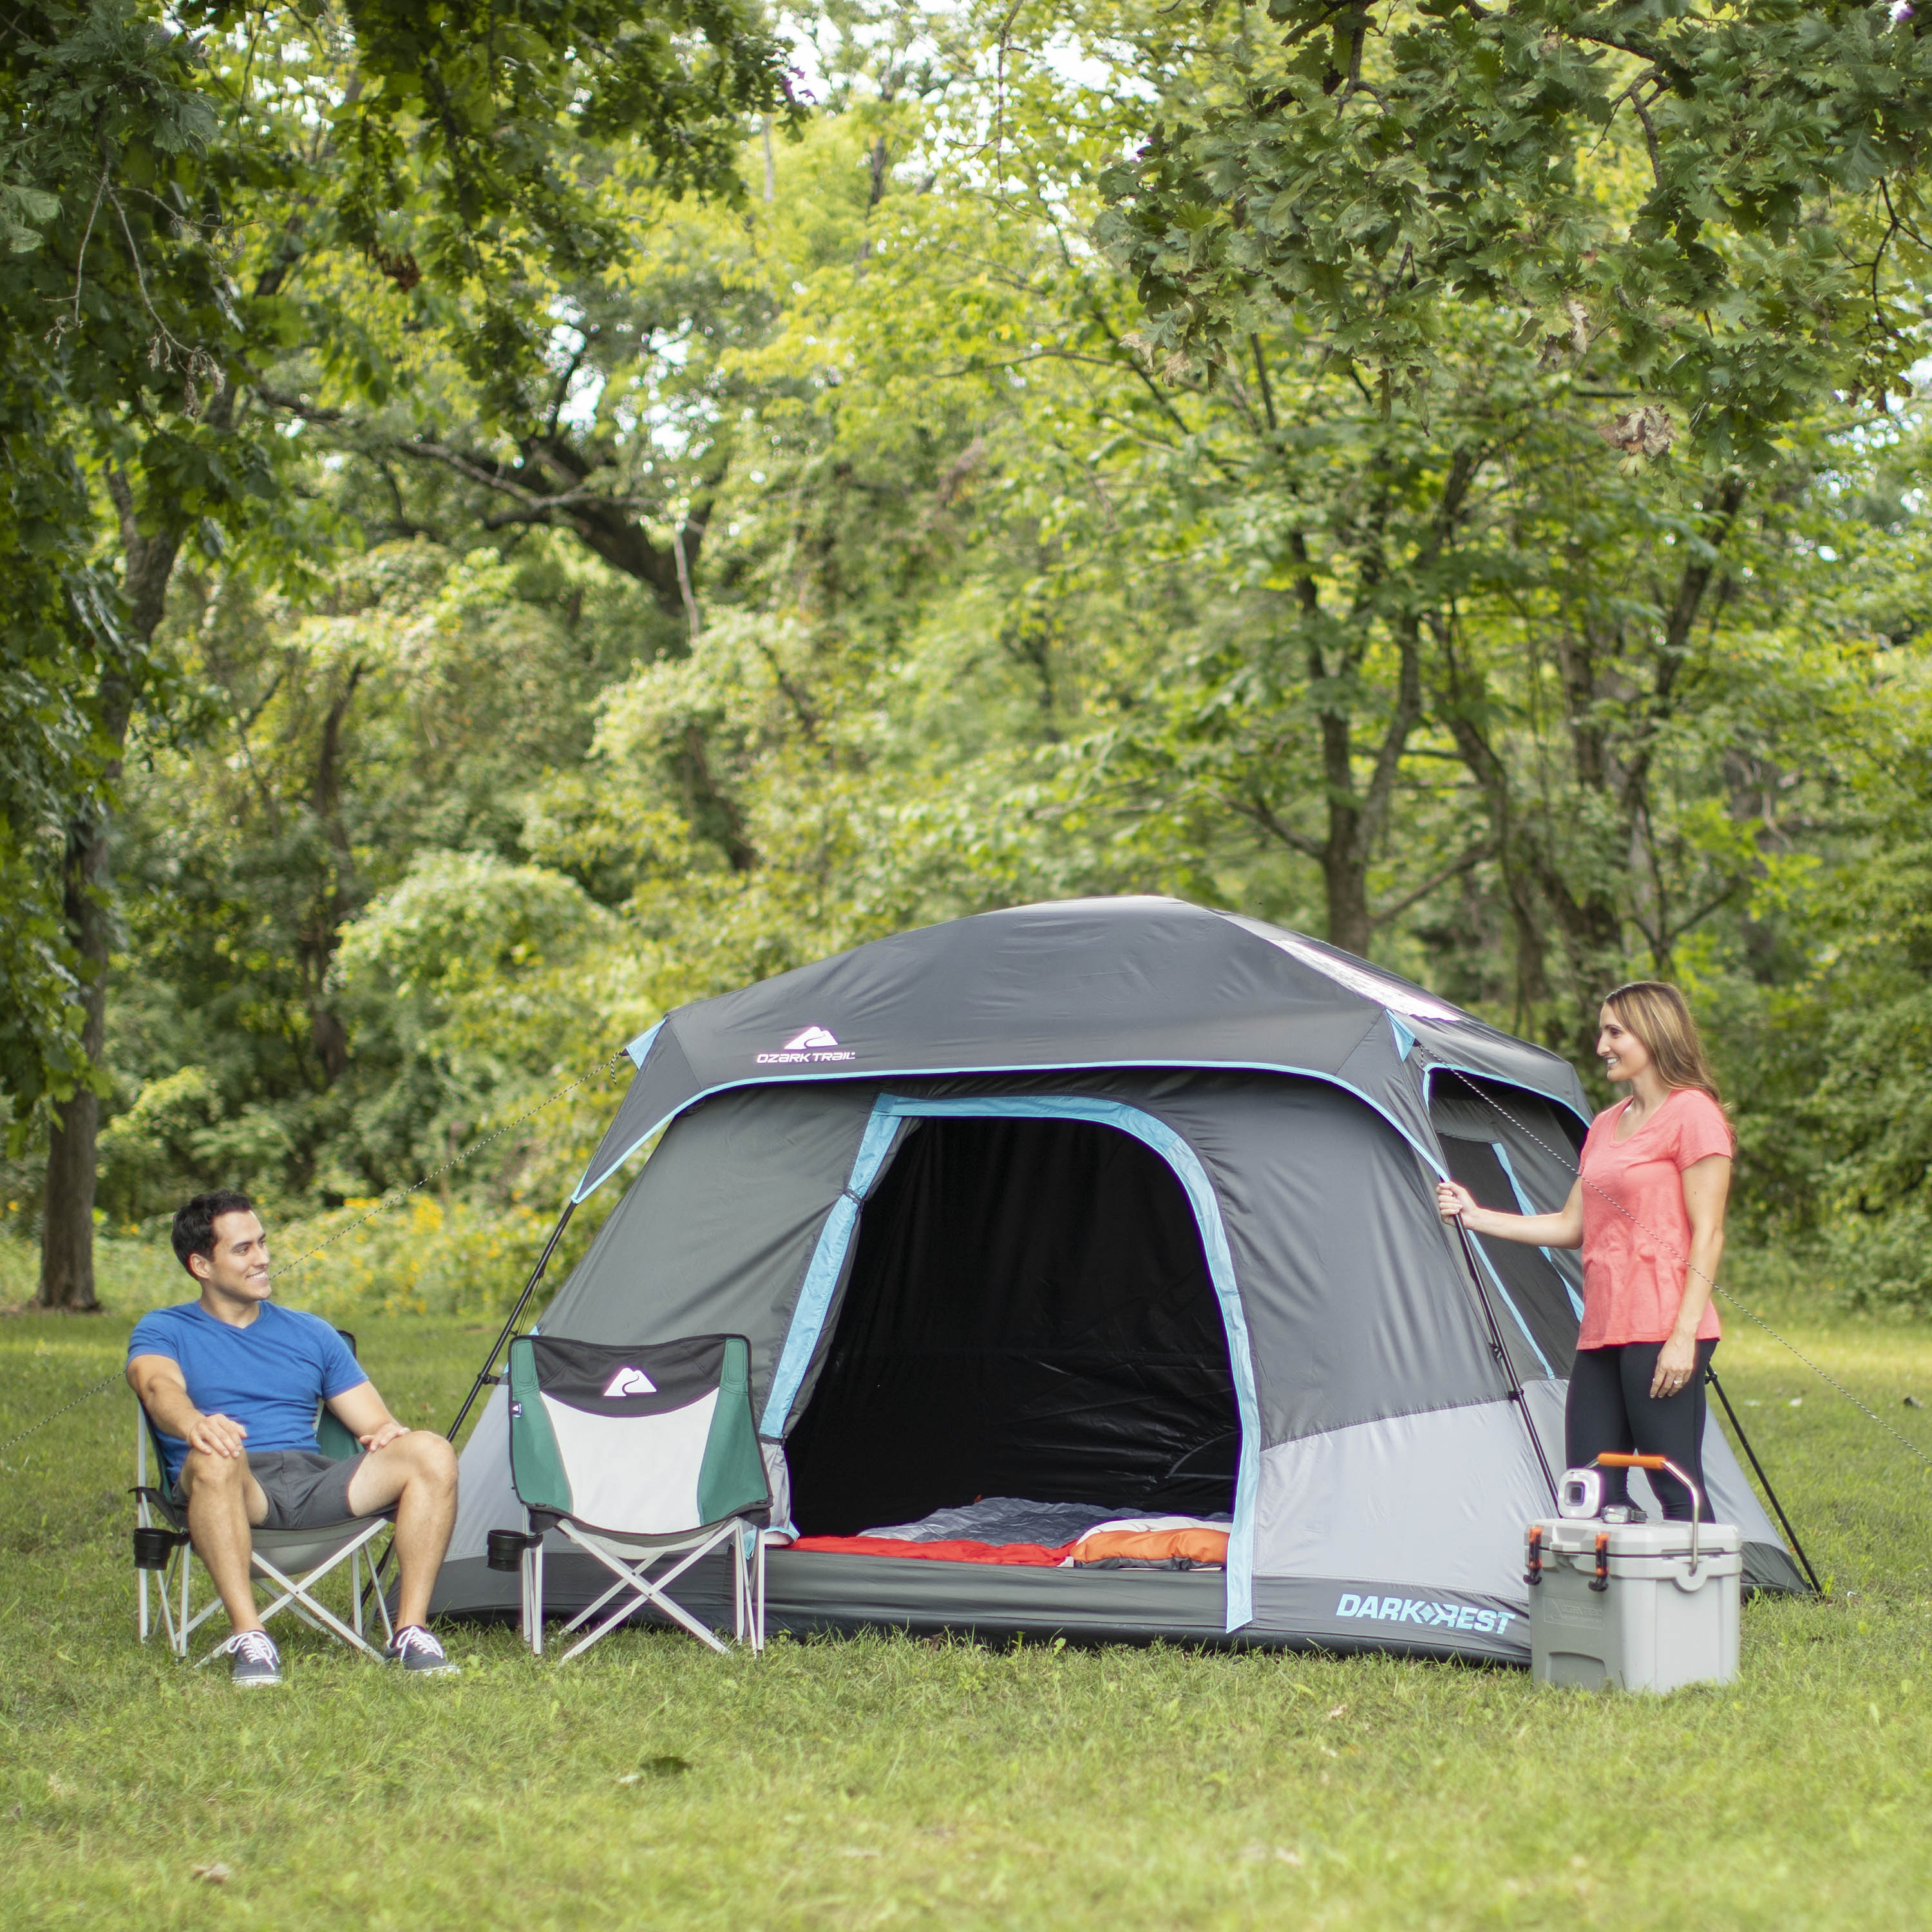 Ozark Trail 10' x 9' 6-Person Dark Rest Cabin Tent w/Skylight Ceiling Panels, 15.4 lbs - image 2 of 7